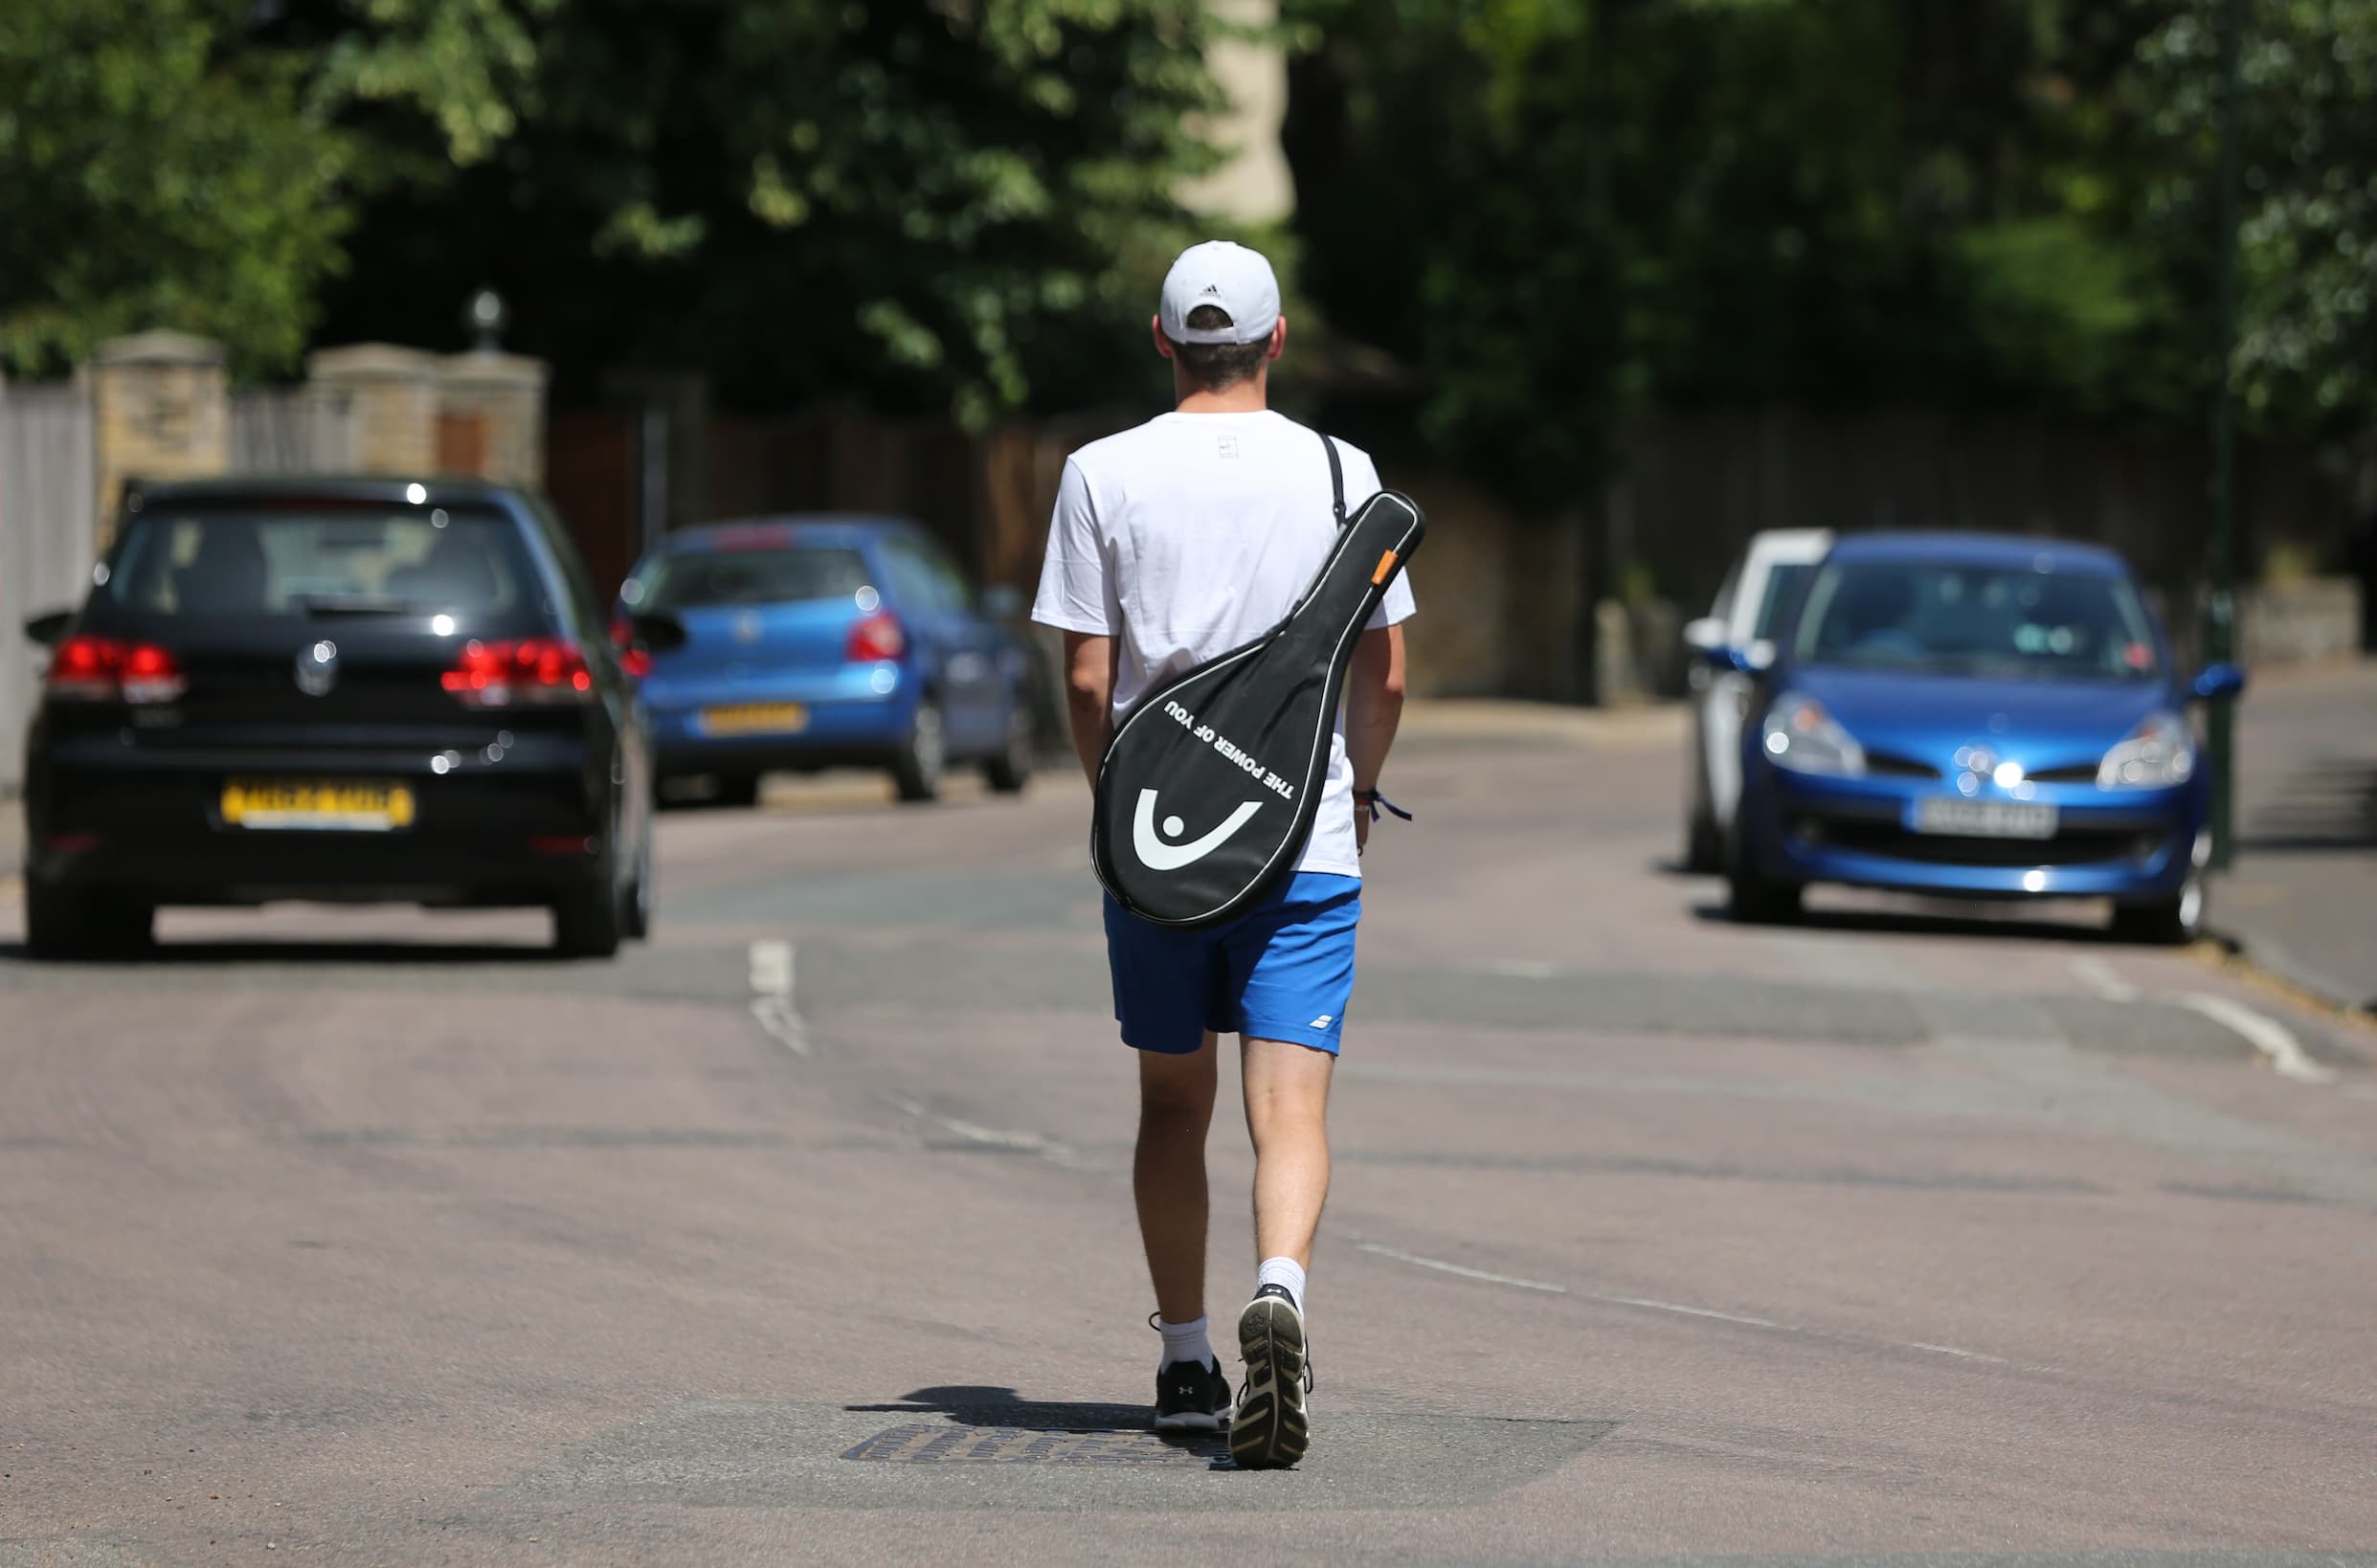 Man with a tennis racquet over his shoulder heading to his car